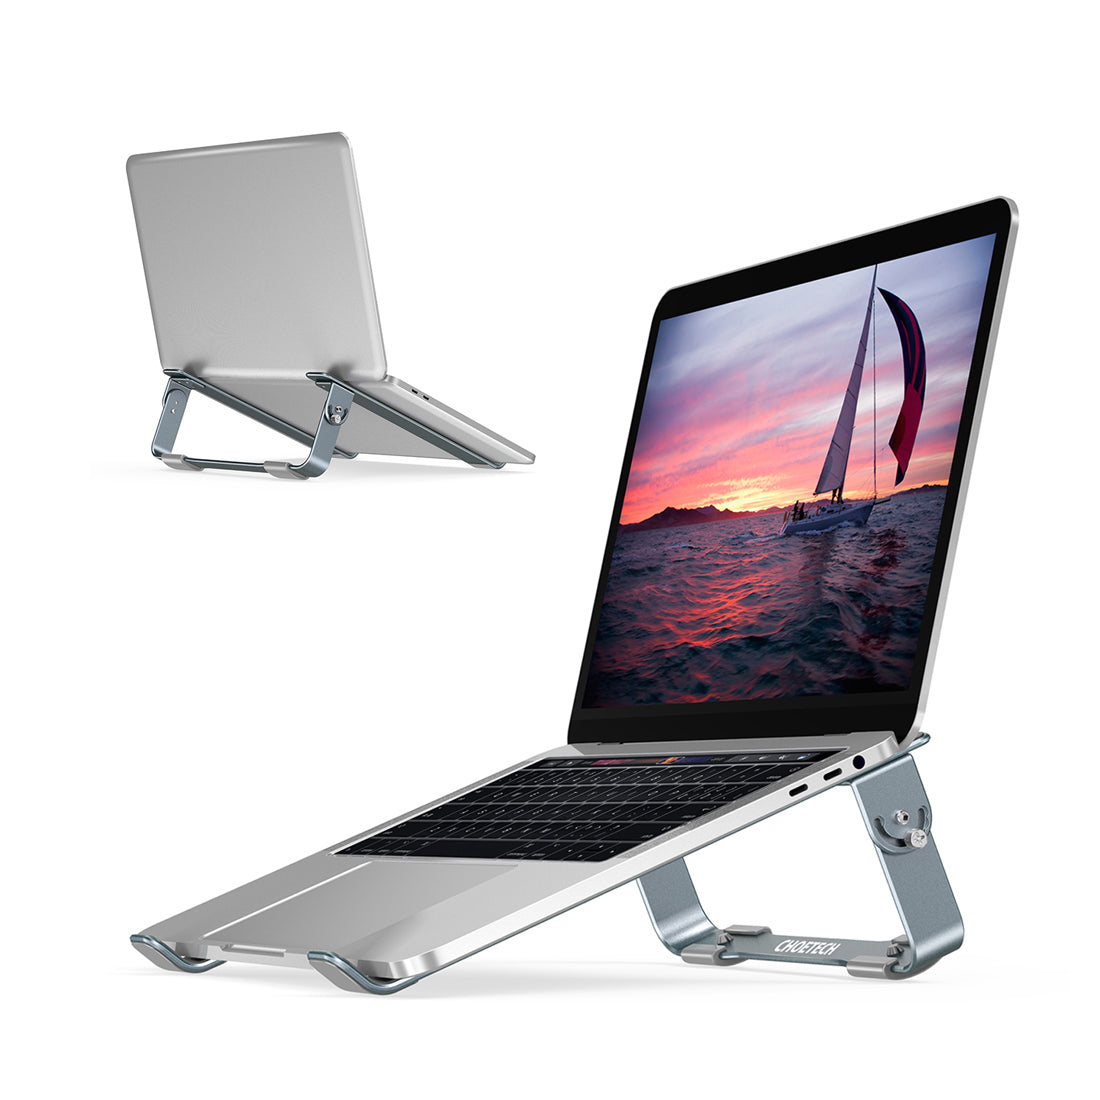 H033 Choetech Cooling Aluminum Laptop Stand